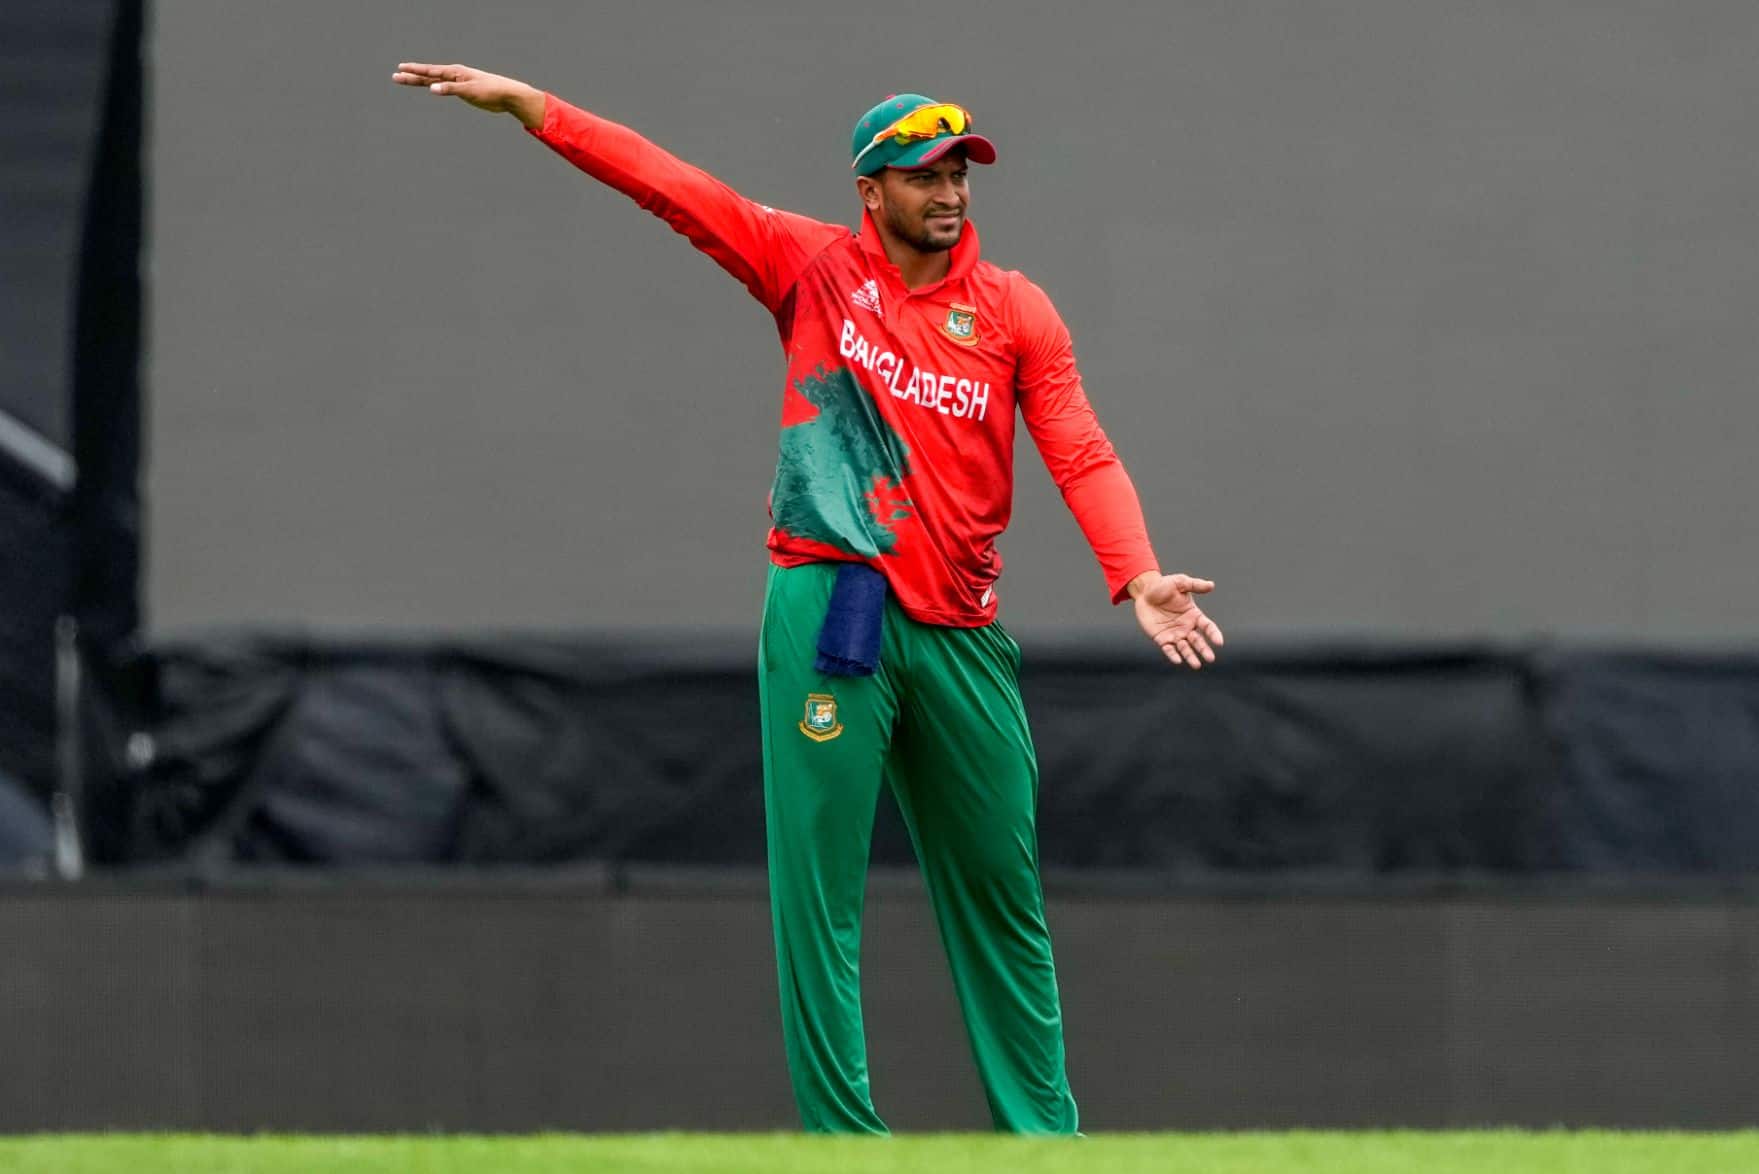 WATCH: Moment of brilliance from Shakib Al Hasan